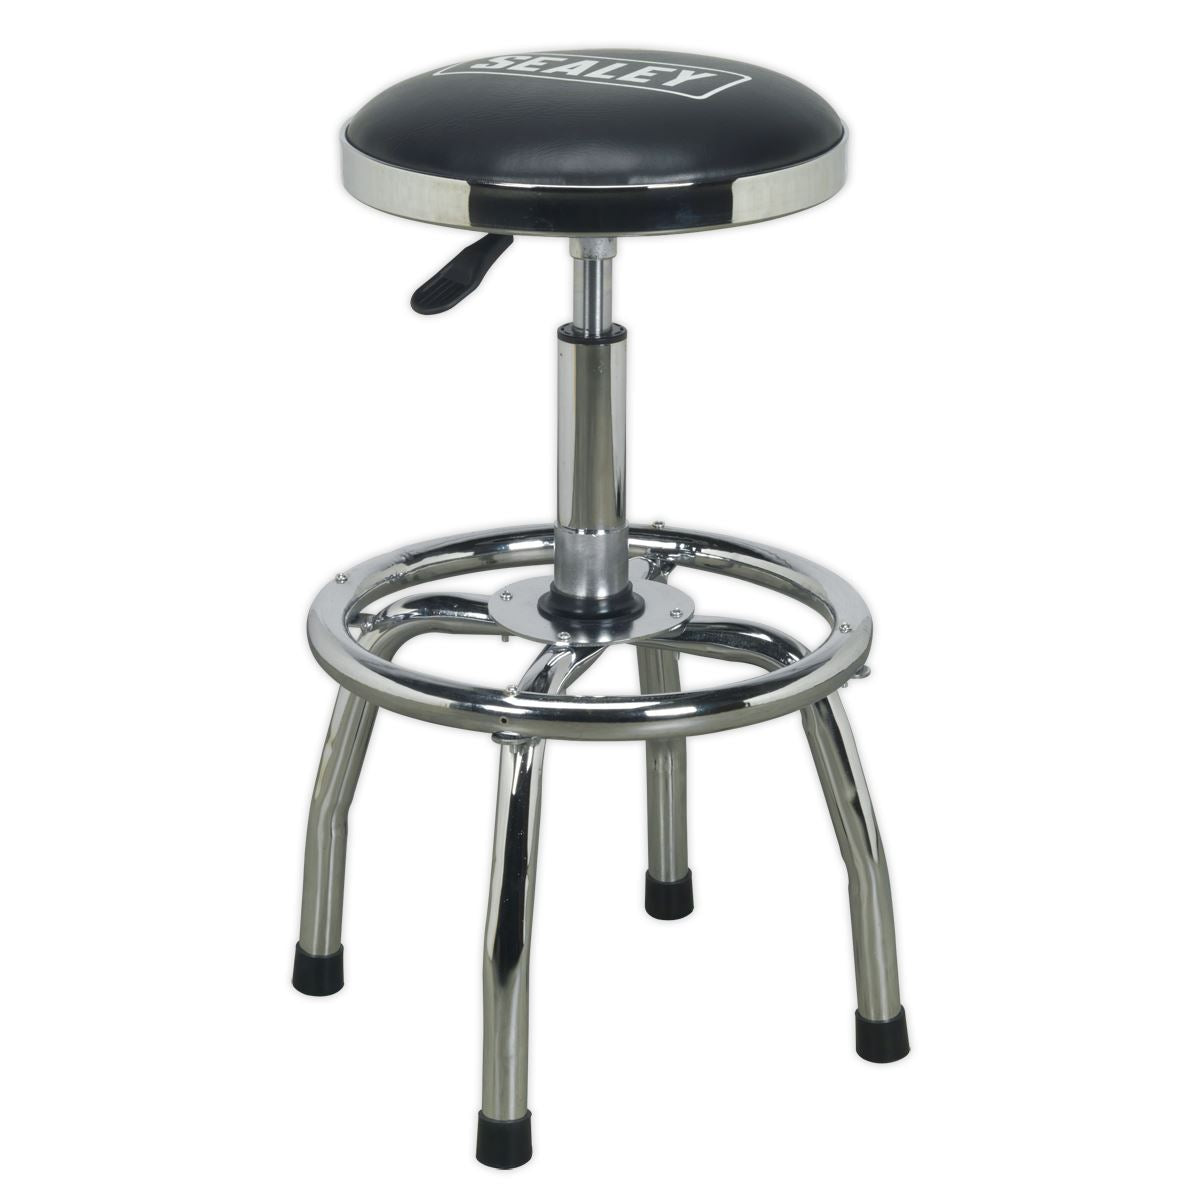 Sealey Pneumatic Stool Heavy-Duty Workshop with Adjustable Height Swivel Seat